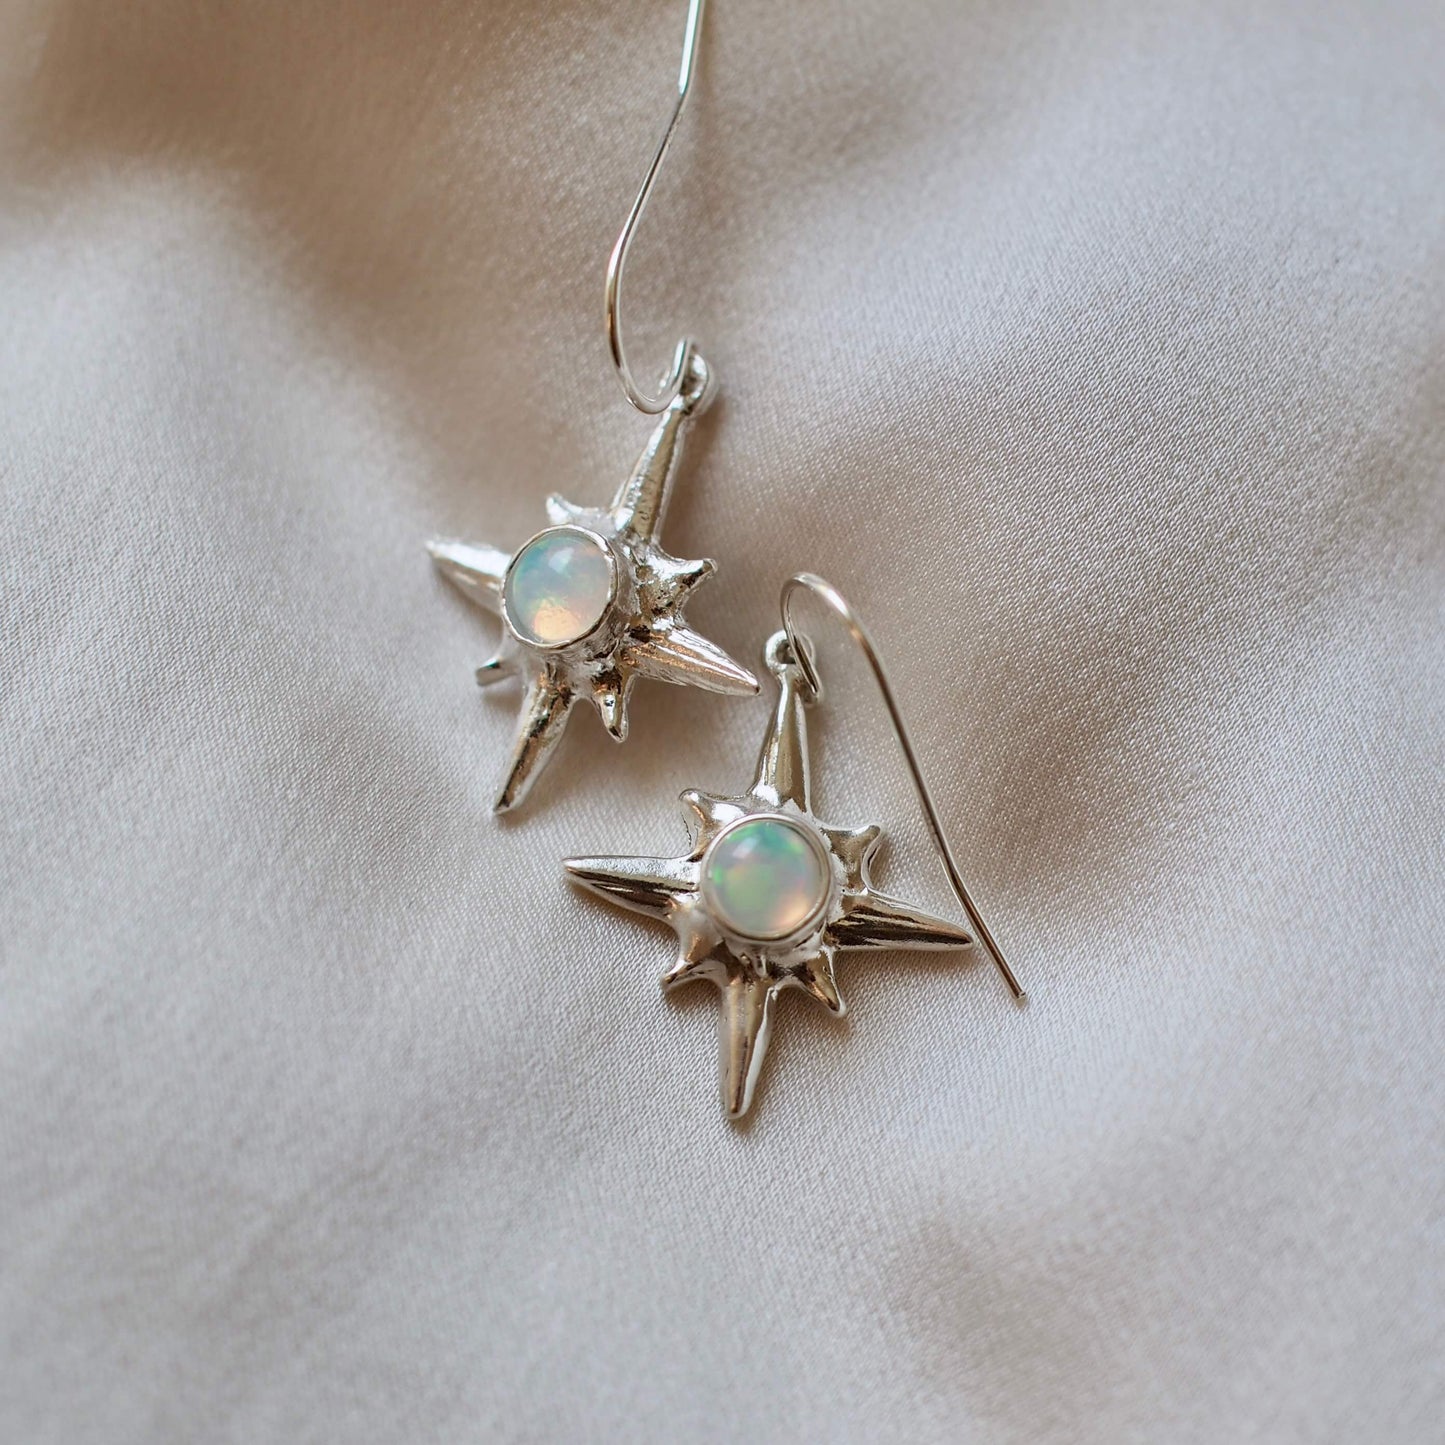 North Star earrings set with sustainably sourced opal artisan made jewelry by Iron Oxide Designs